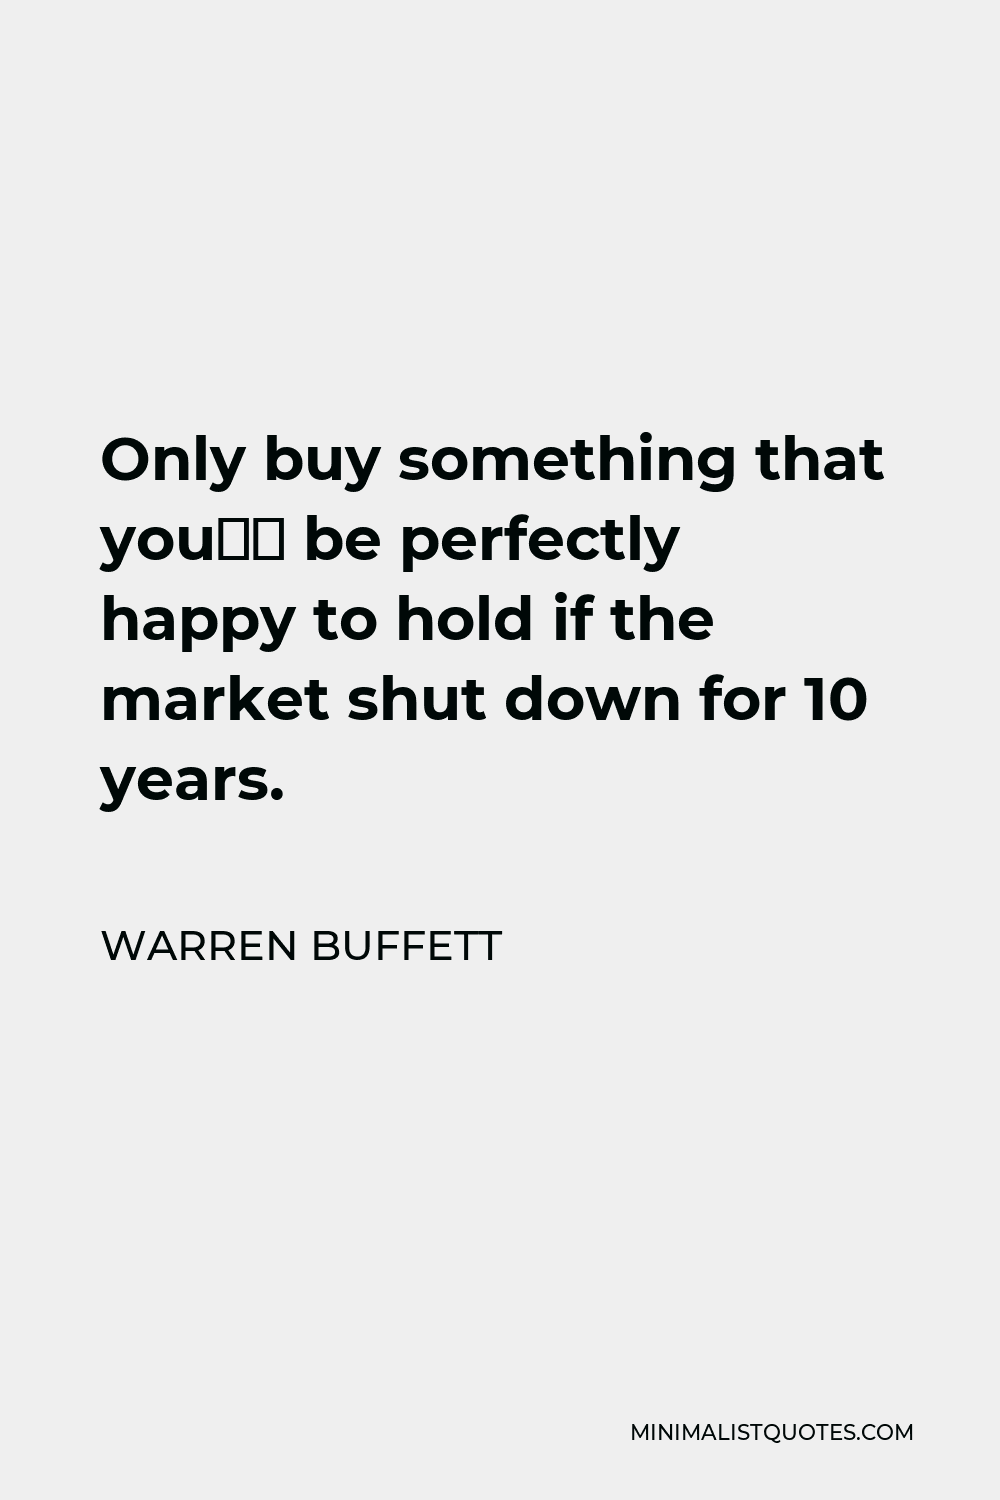 Warren Buffett Quote: Only buy something that you’d be perfectly happy ...